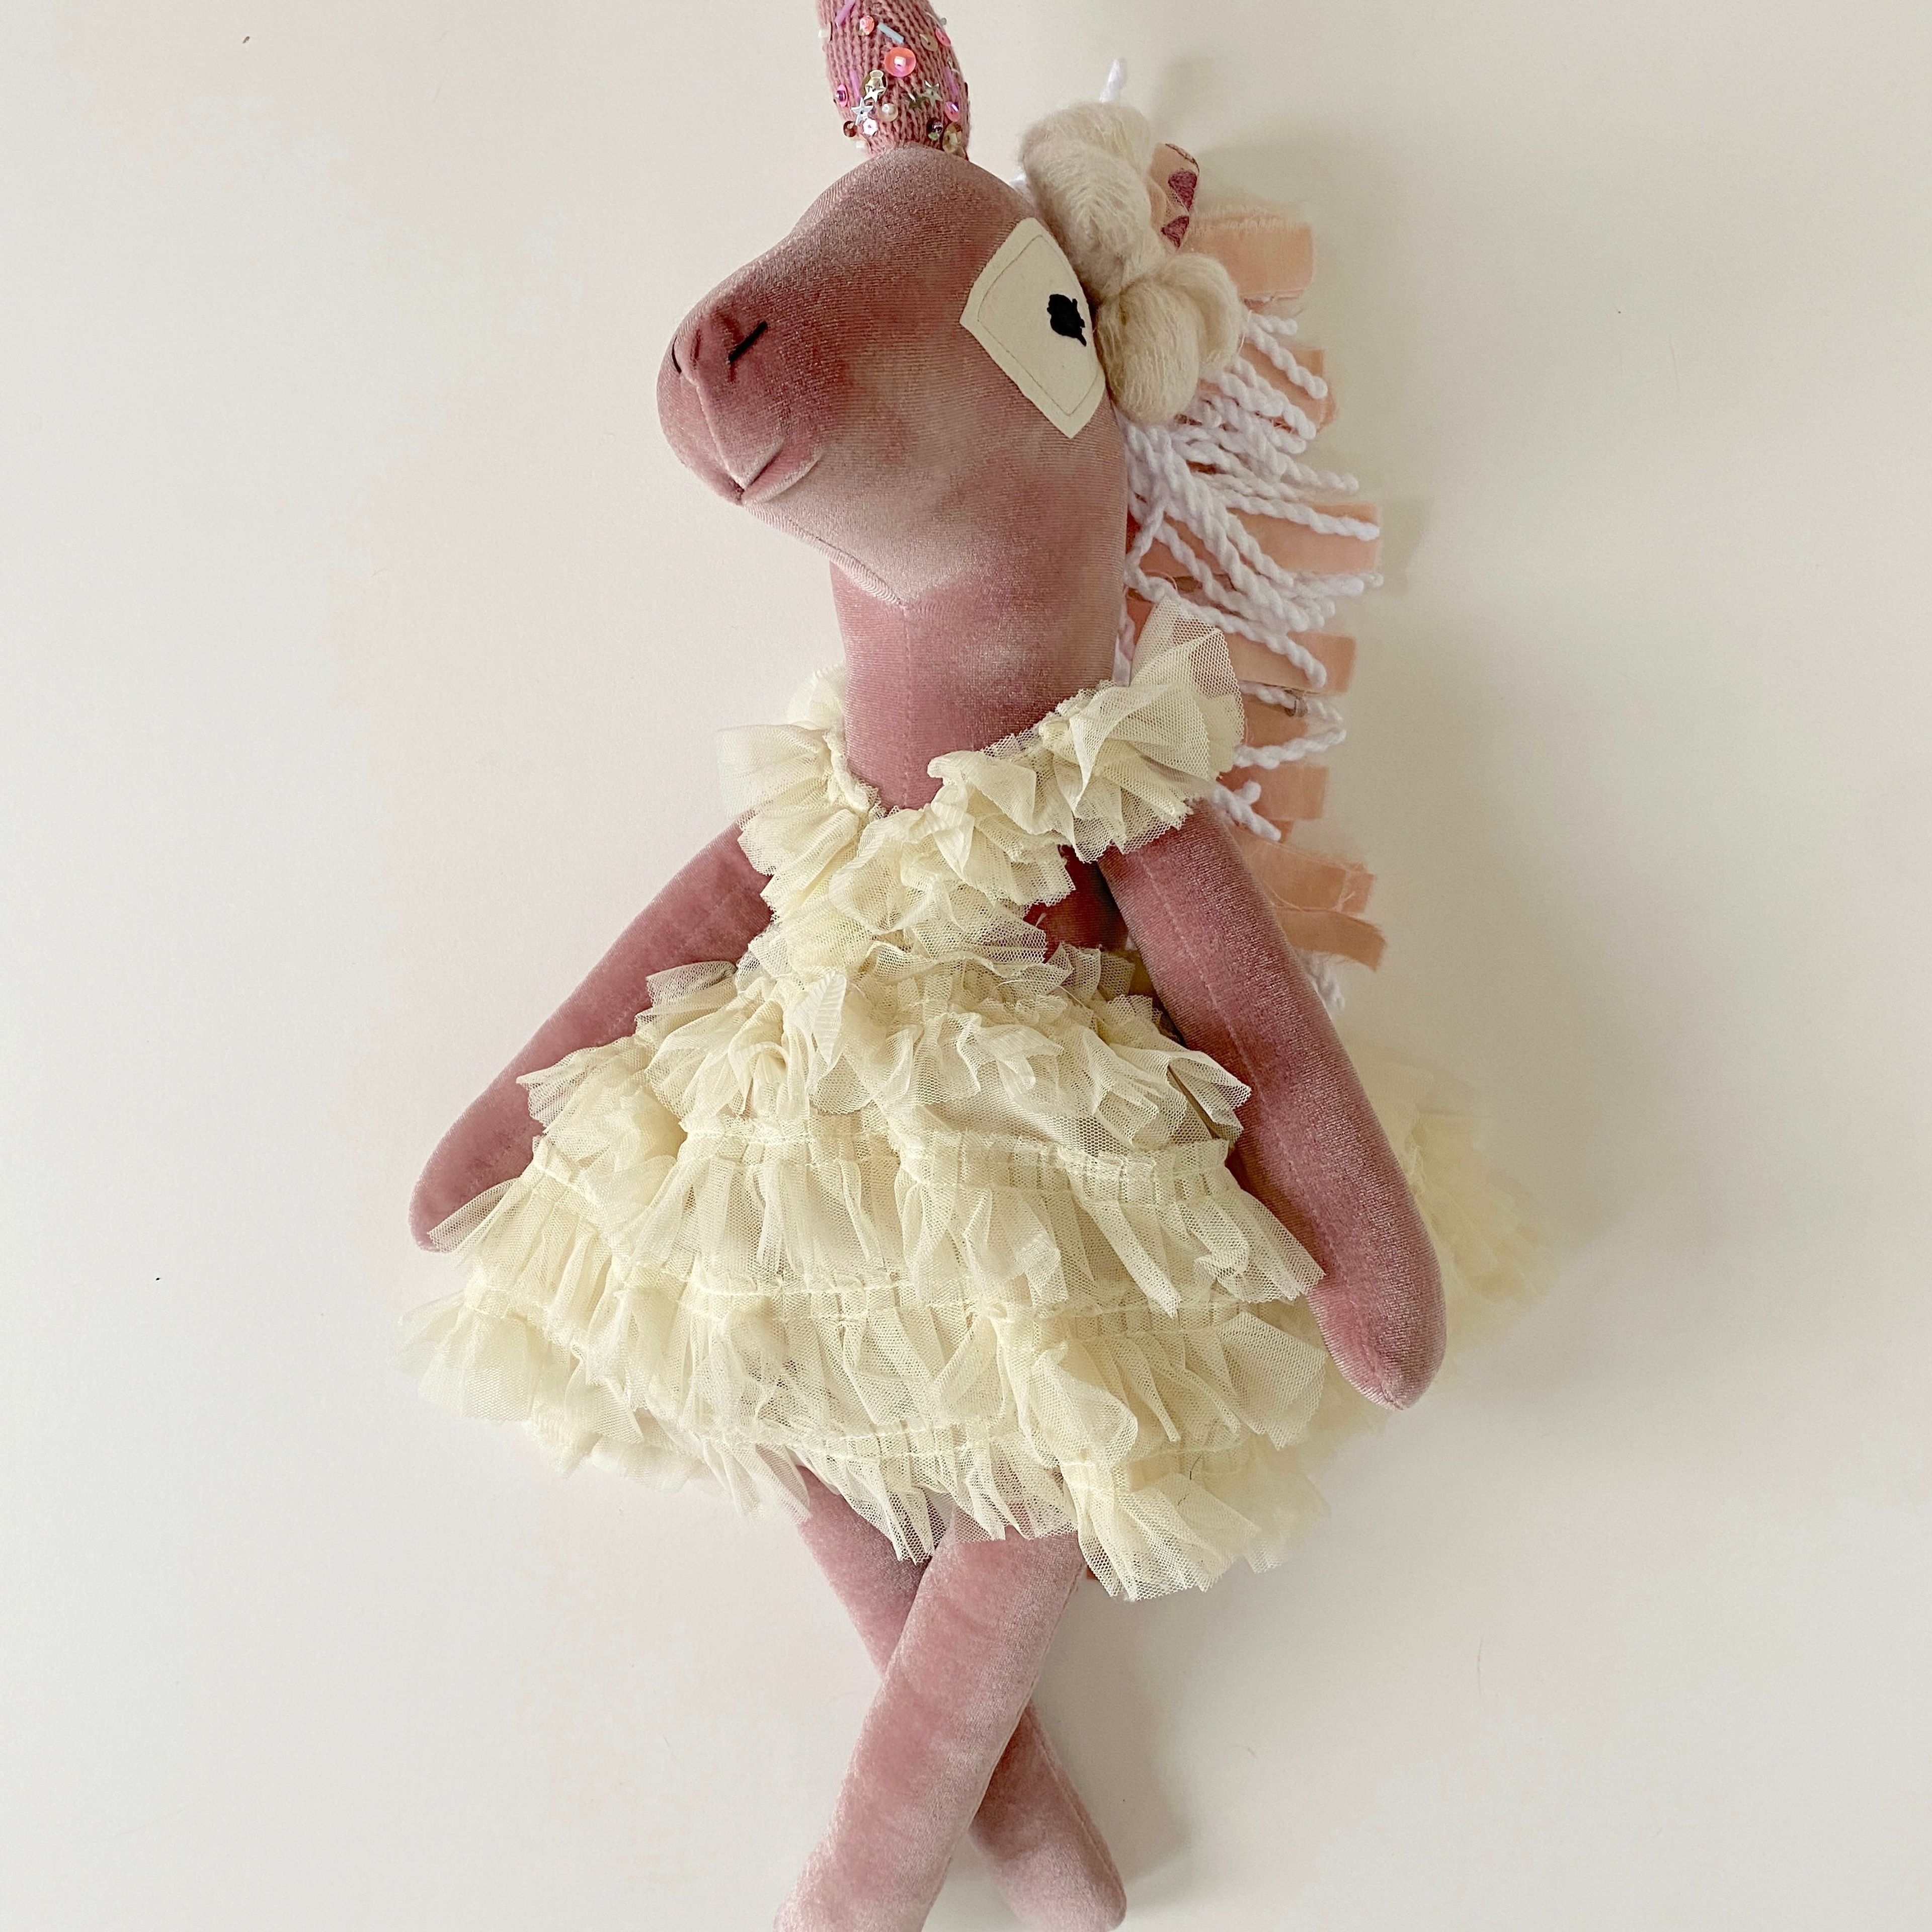 2021 Holiday Couture Unicorn Art Doll // Sugar Cookie